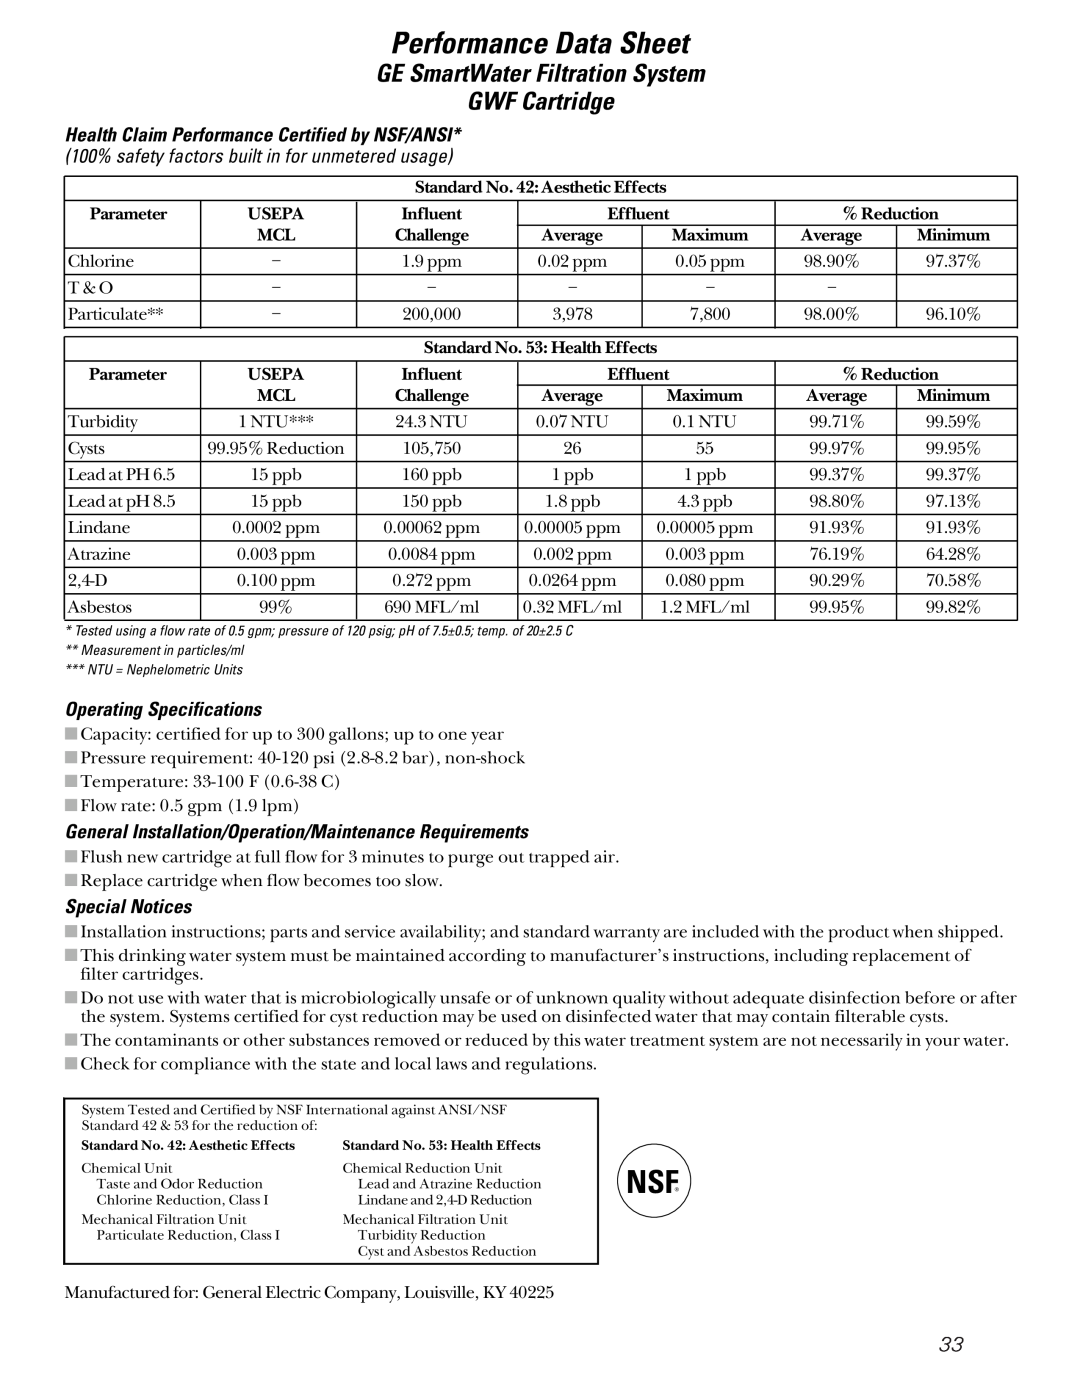 GE 21 Performance Data Sheet, GE SmartWater Filtration System GWF Cartridge, Operating Specifications, Special Notices 